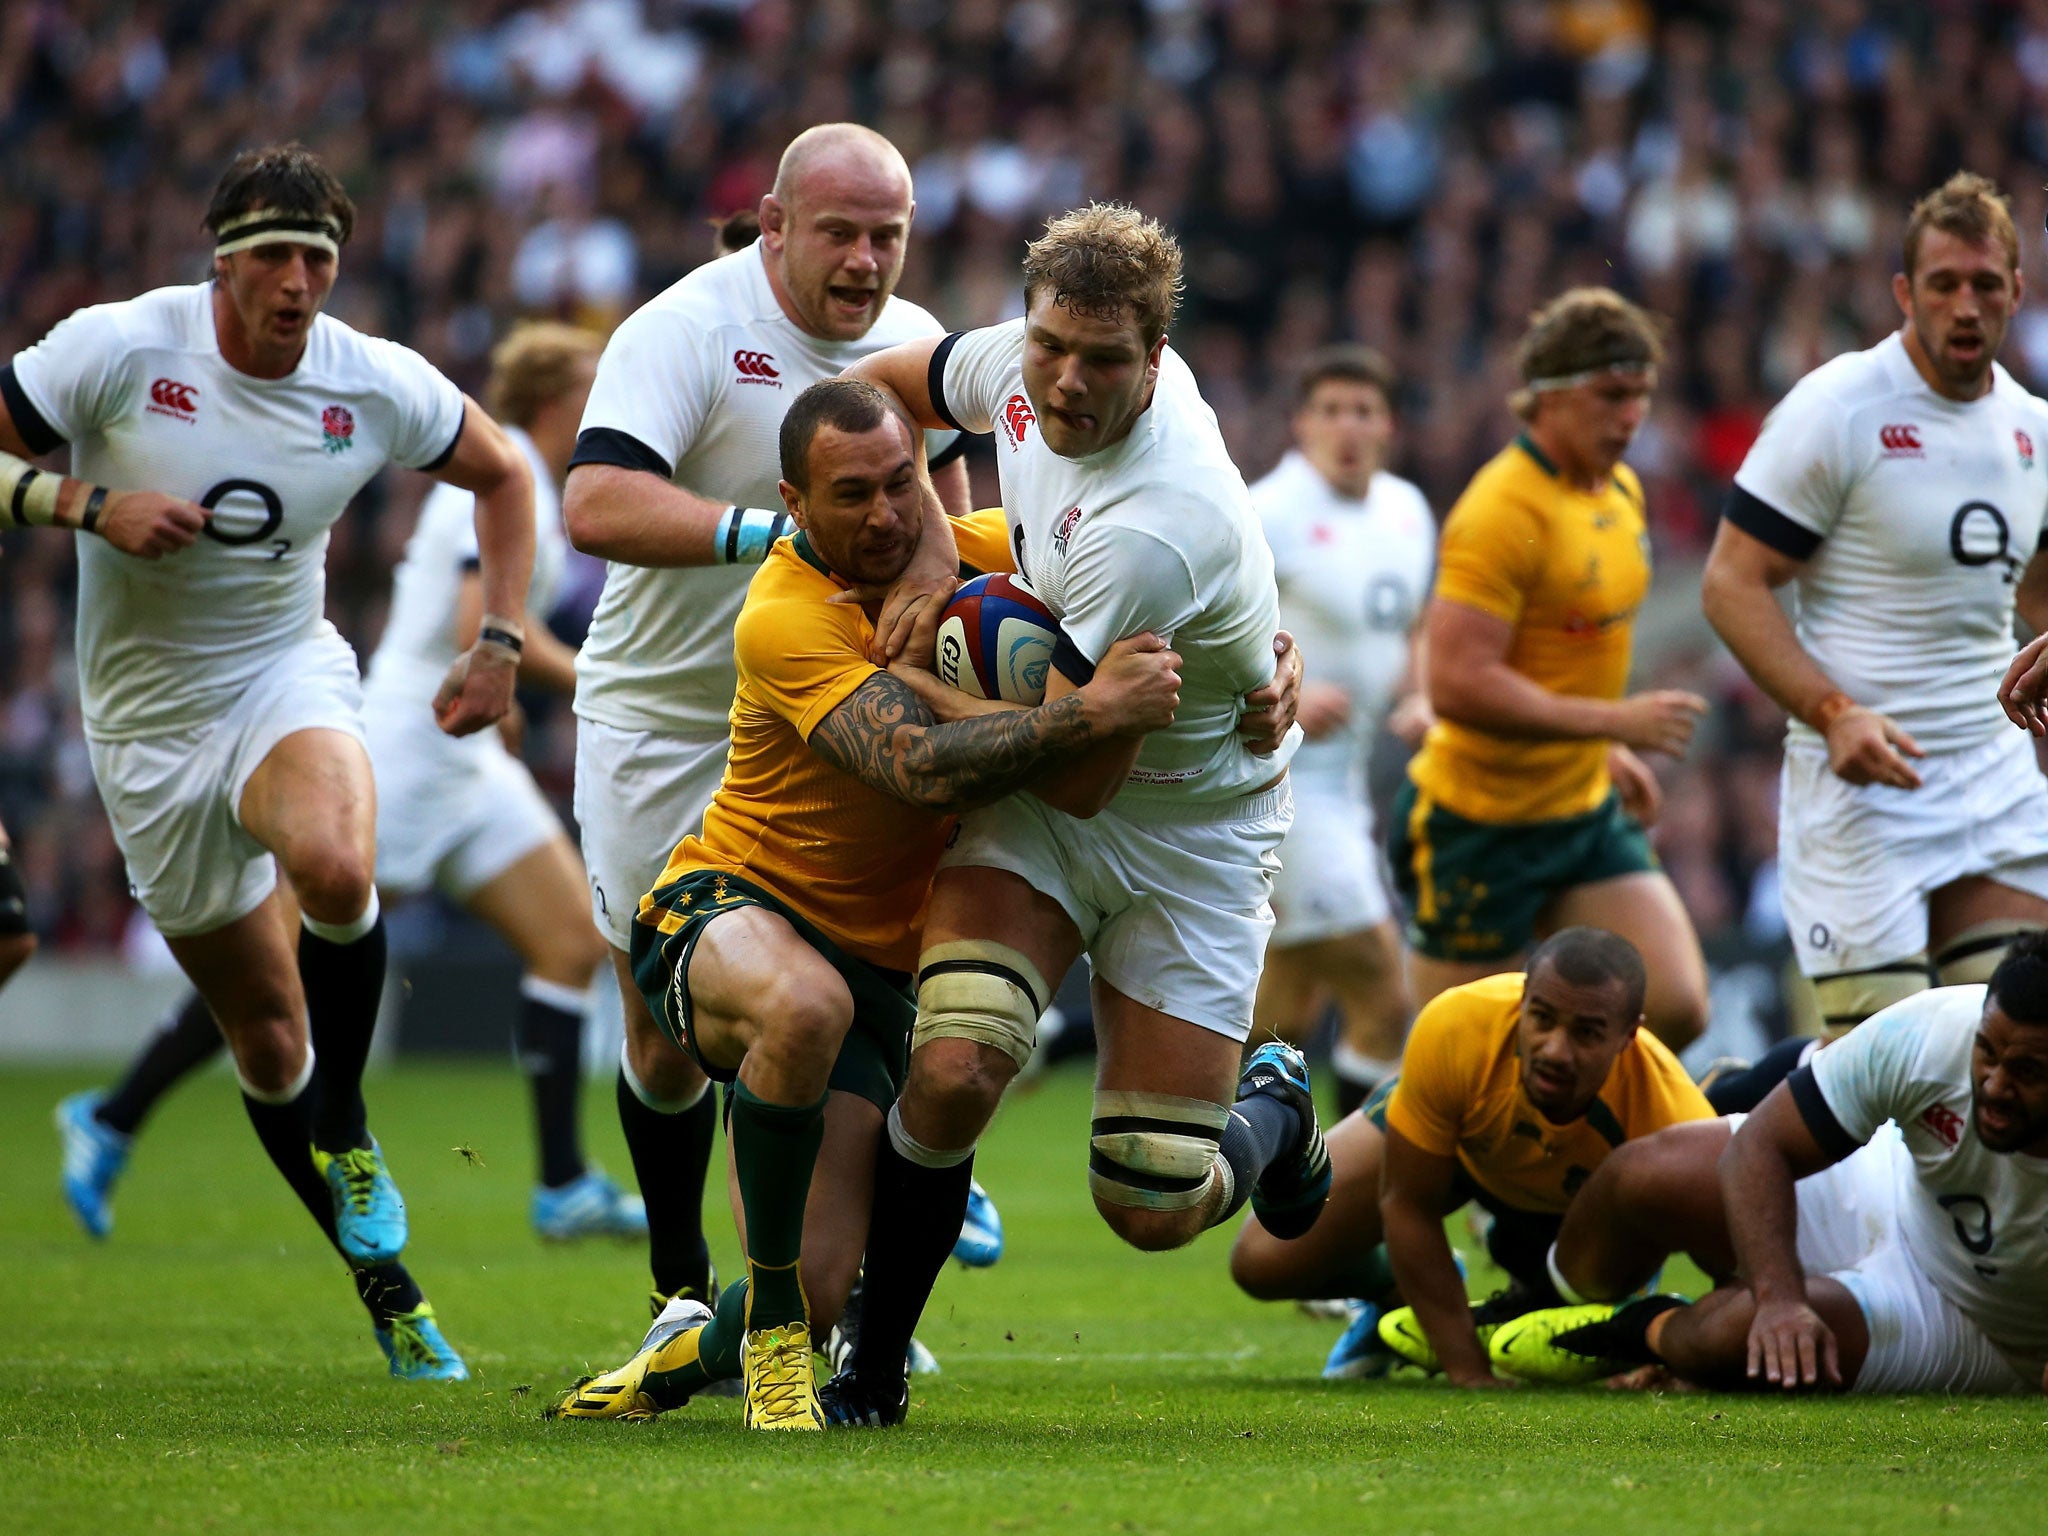 England's Joe Launchbury tussles with Will Genia at Twickenham in a more direct and physical display than hitherto